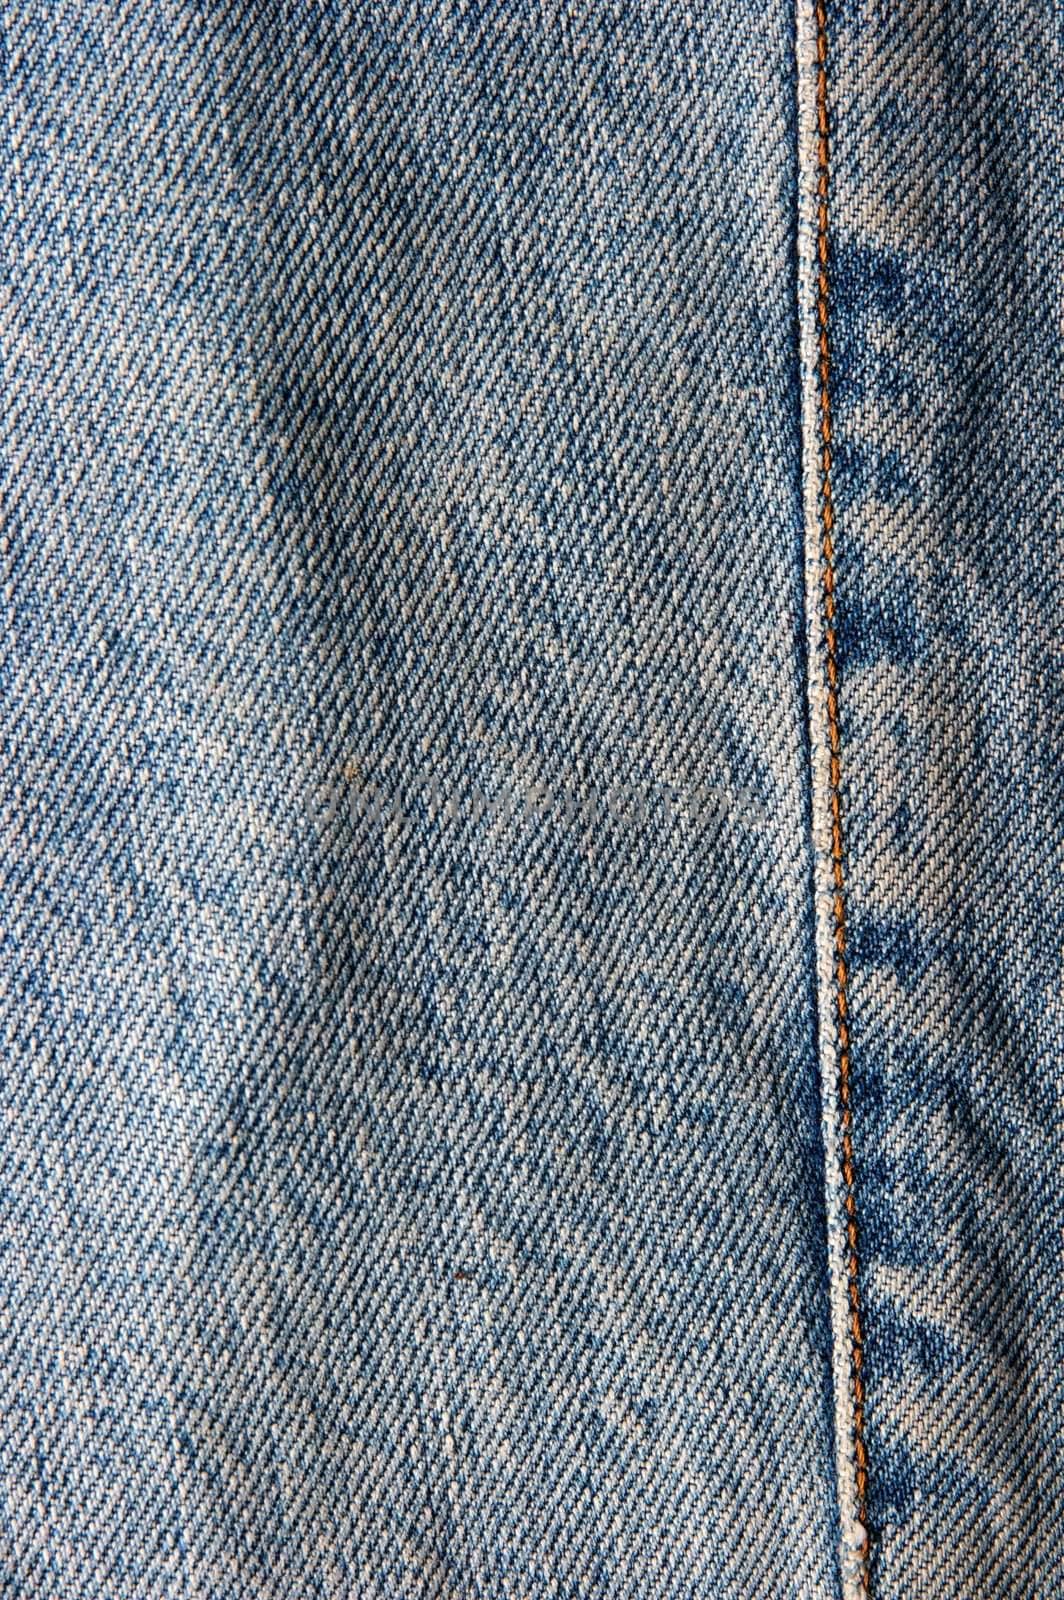 Blue jeans texture with stiching